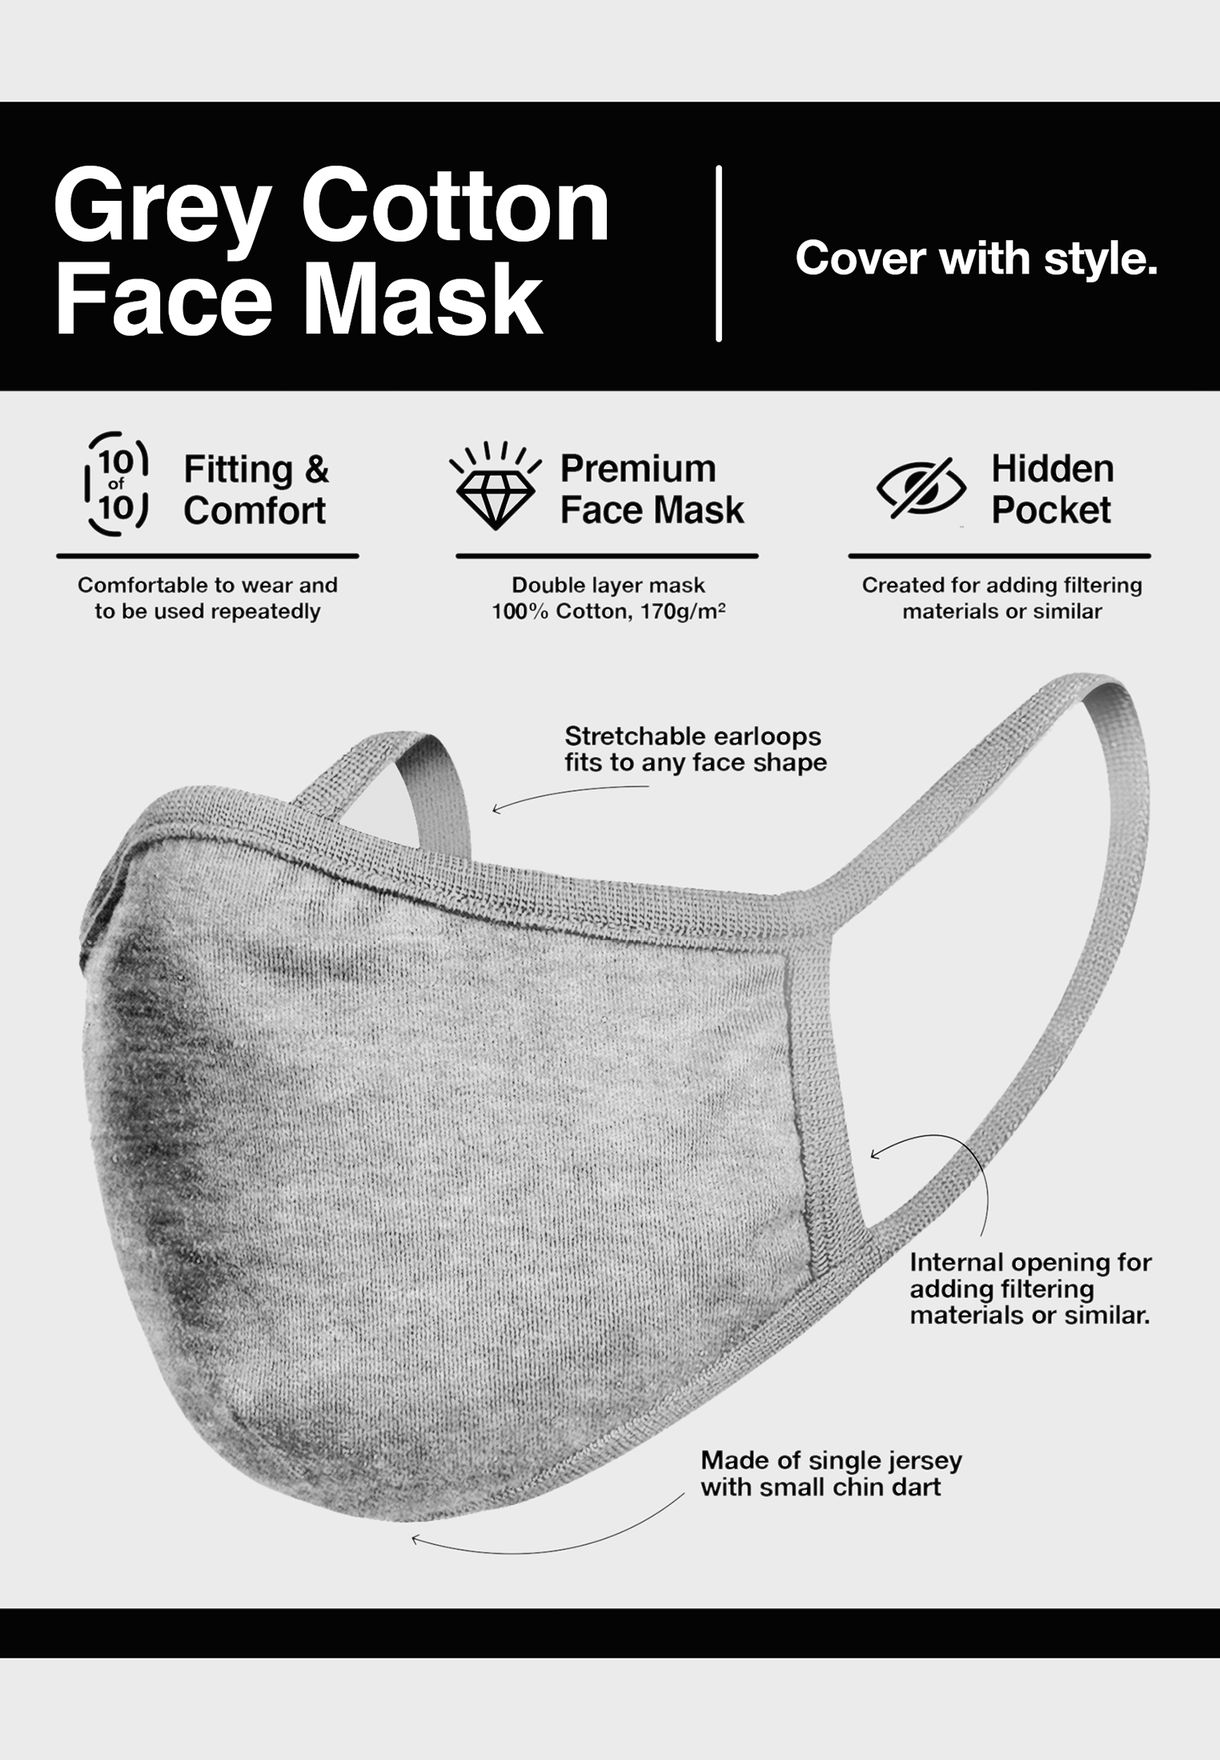 Essential Face Mask